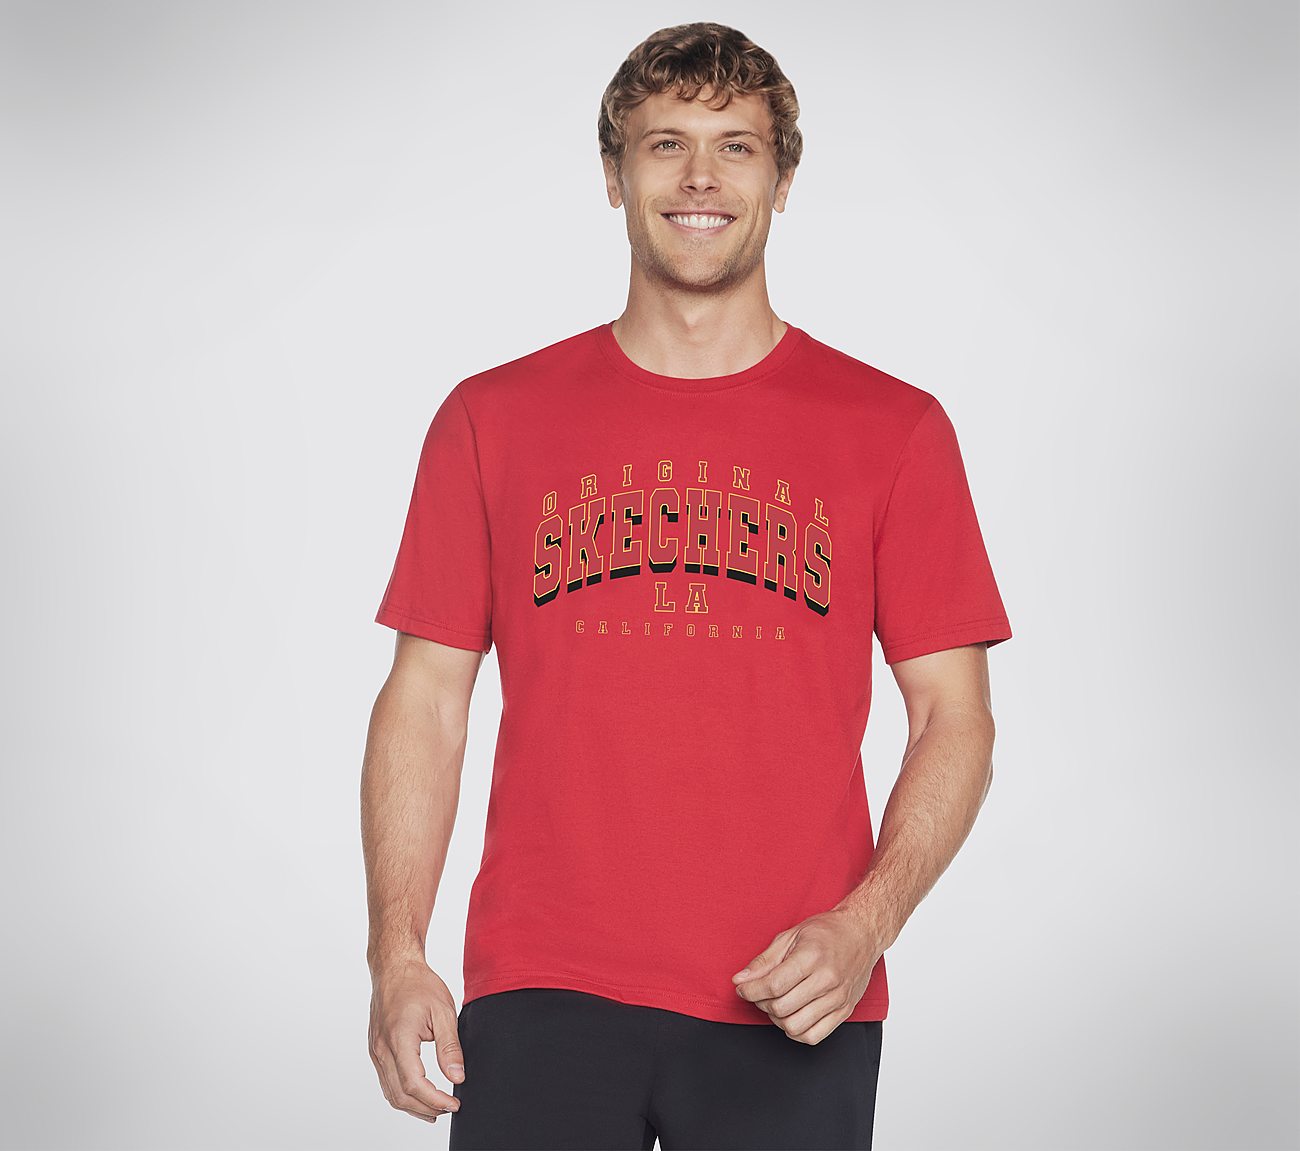 SKECHERS UNIVERSITY T-SHIRT, RED Apparel Lateral View